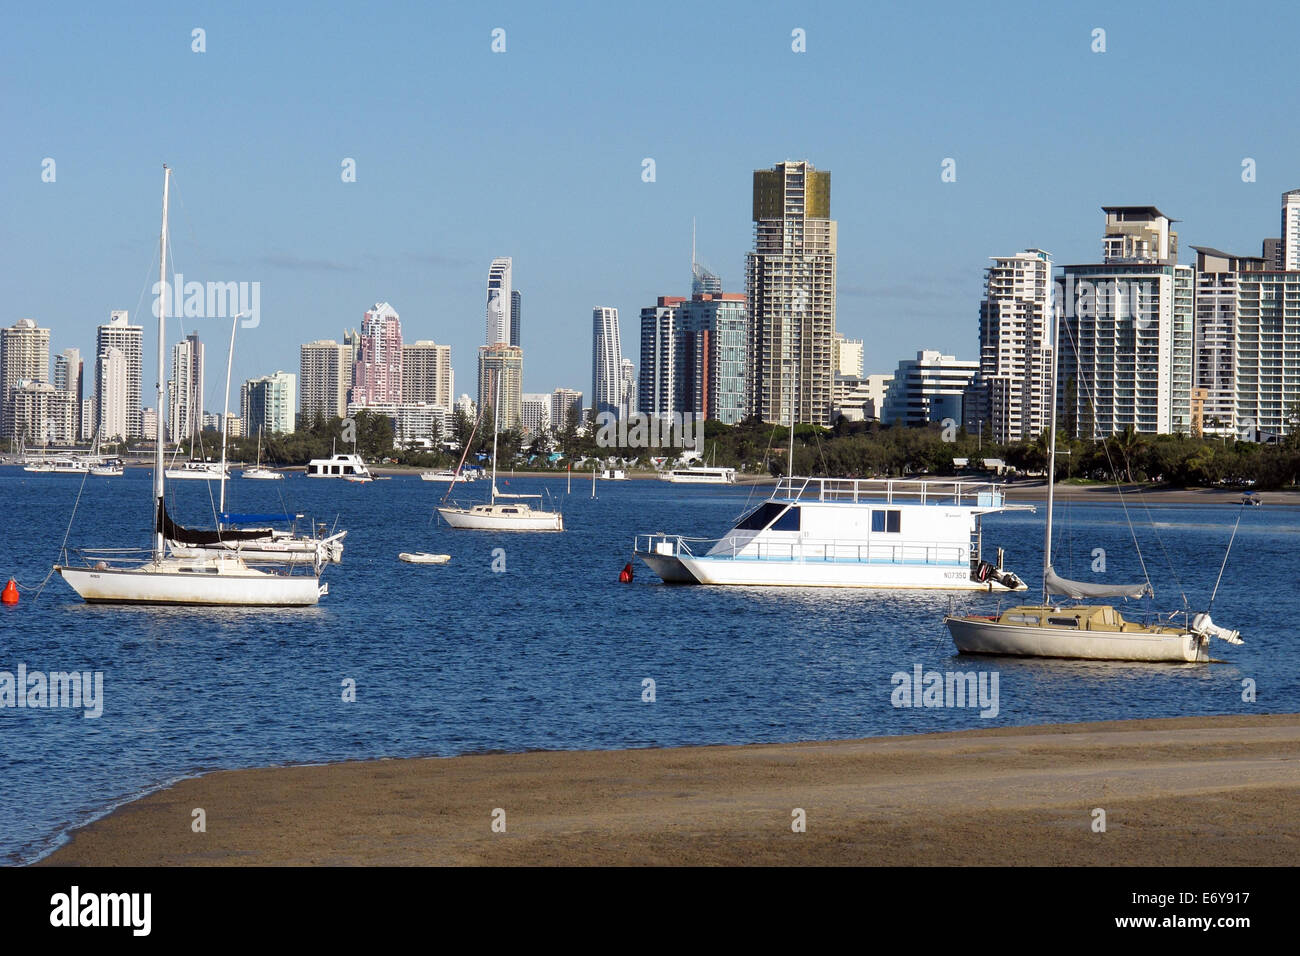 Boats moored in the Broadwater with high rise buildings in the background. Gold Coast Australia Stock Photo